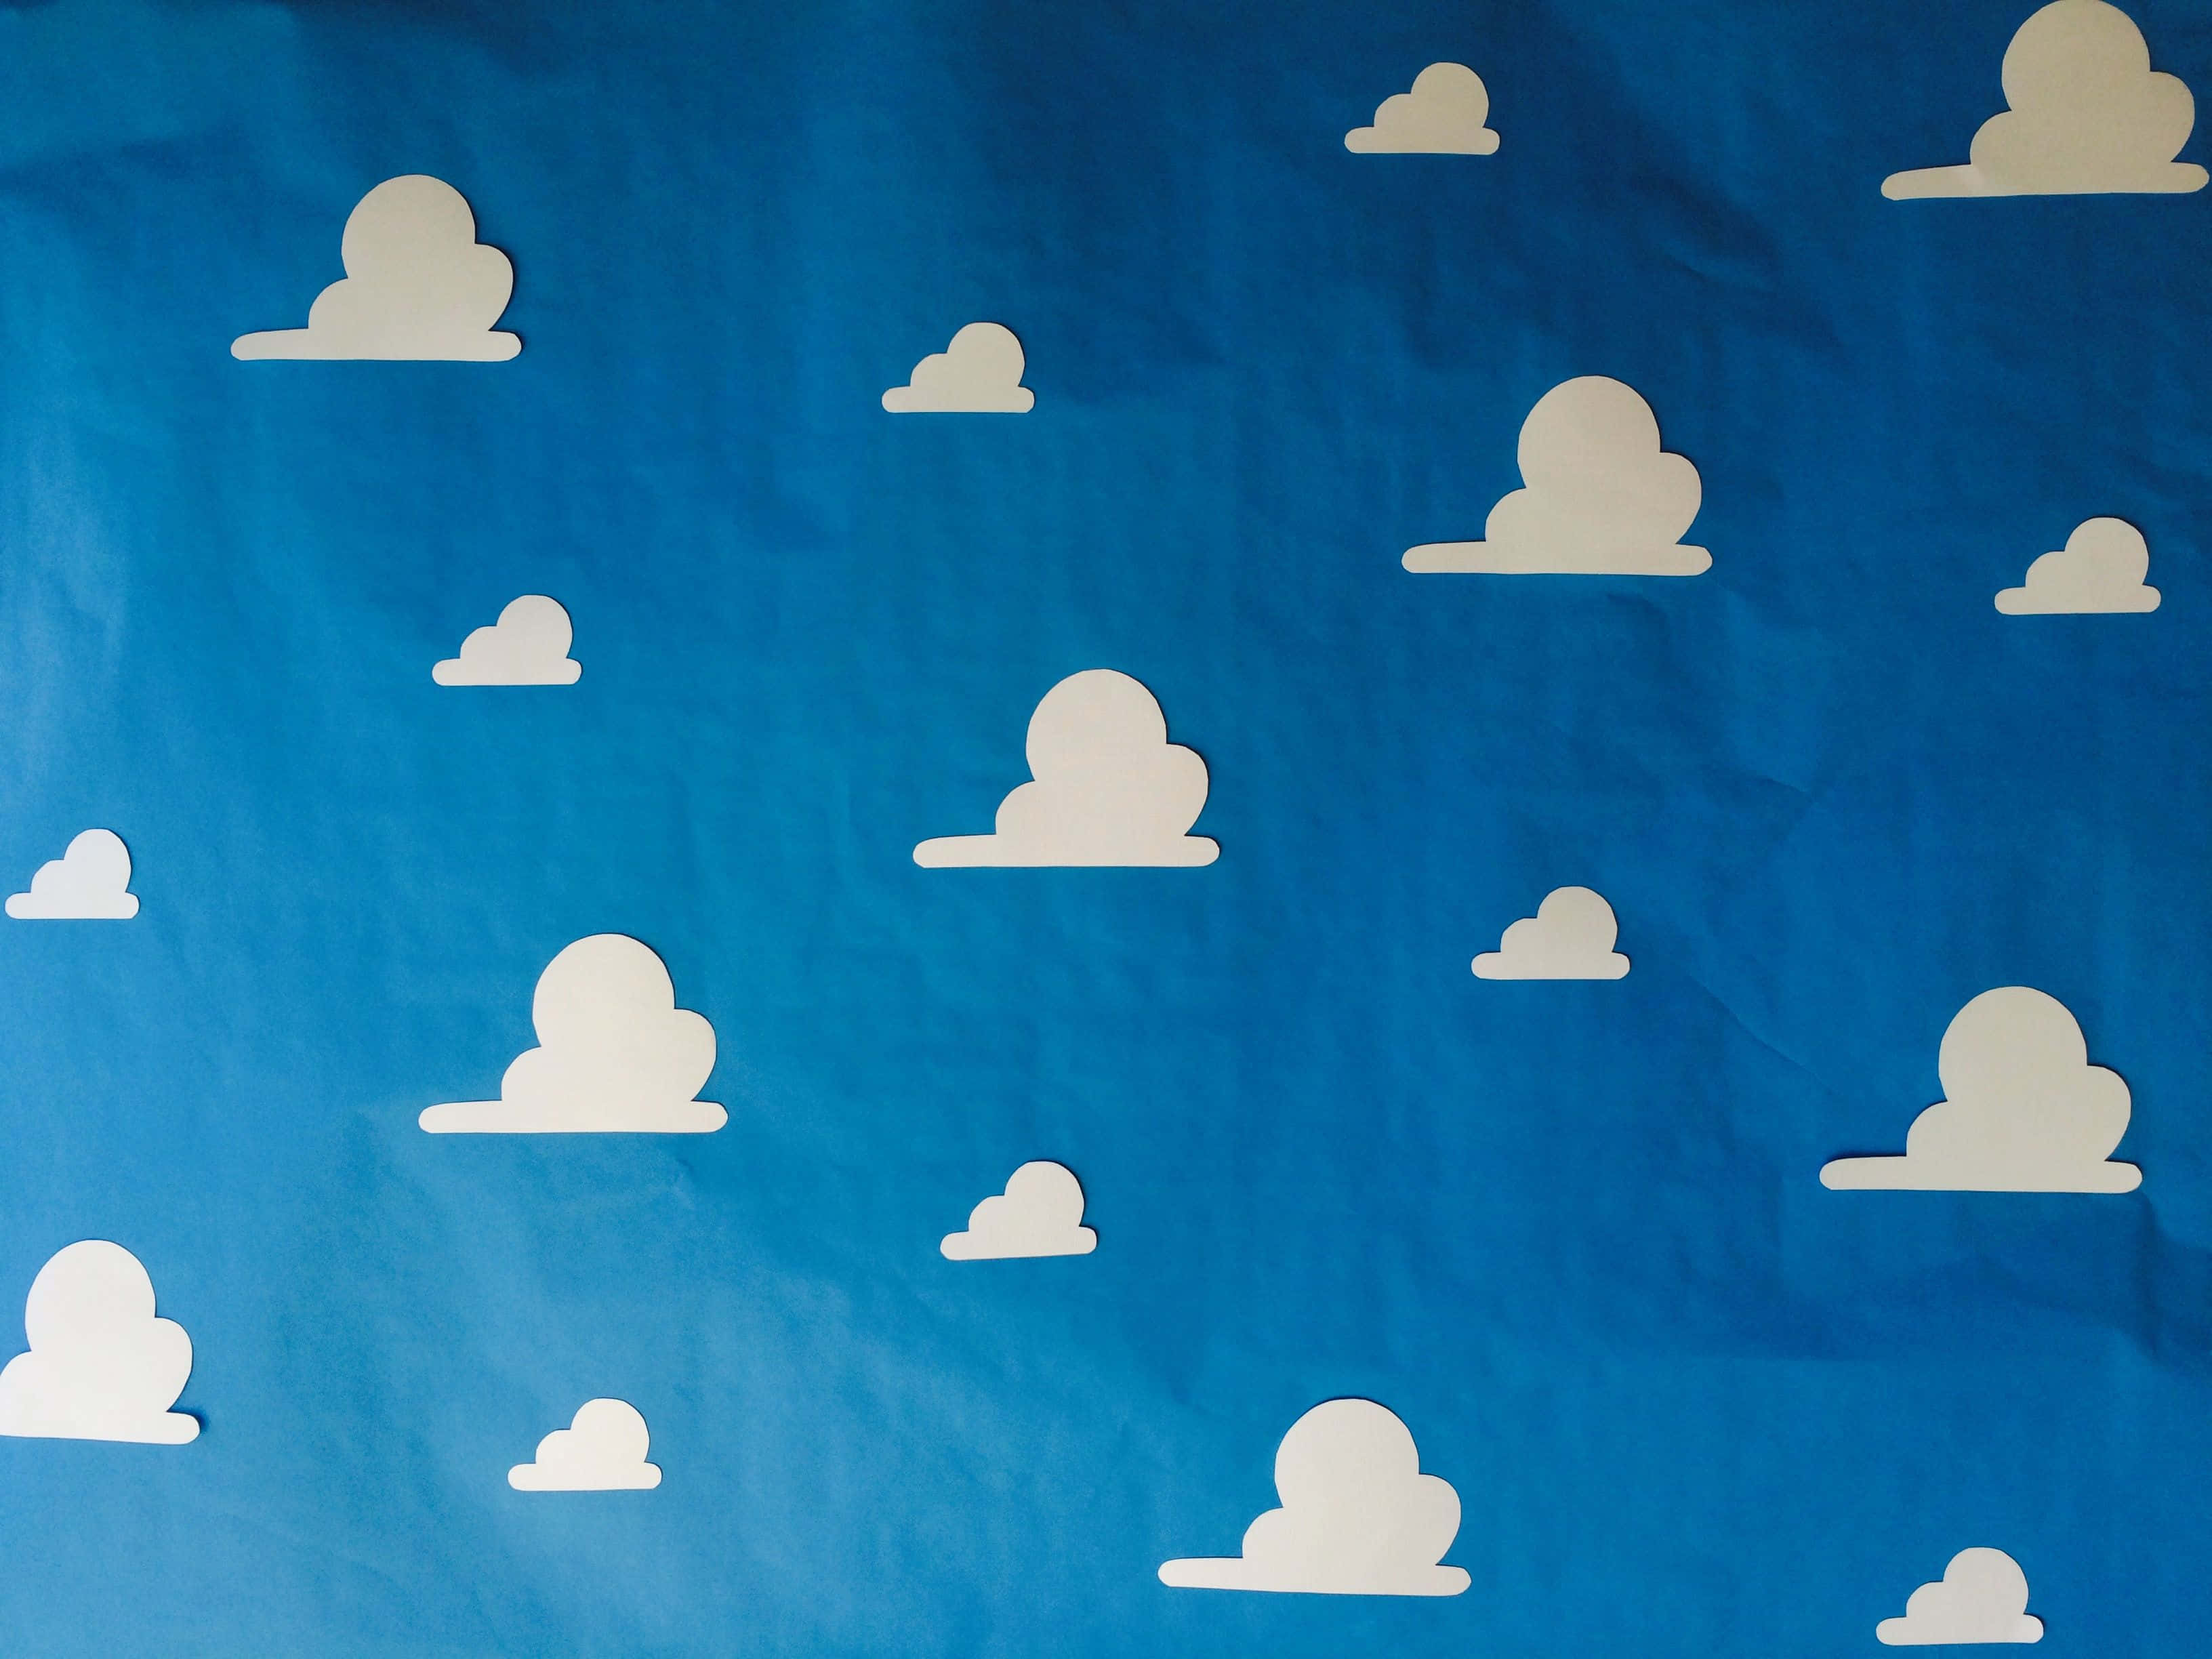 The magical world of Toy Story with a vibrant cloud background